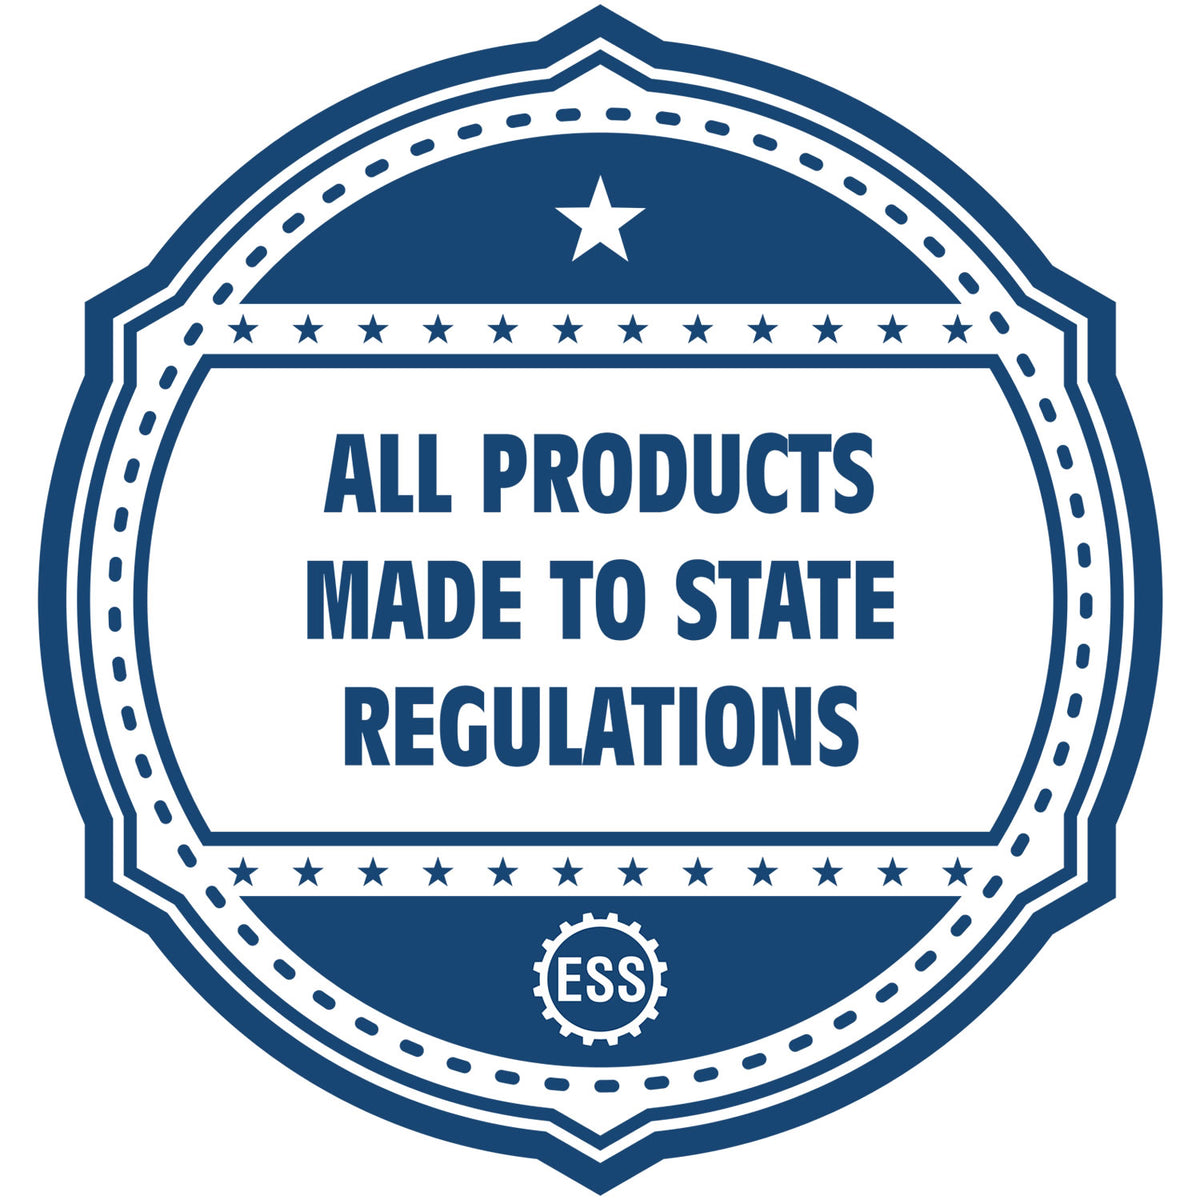 An icon or badge element for the Slim Pre-Inked State Seal Notary Stamp for Minnesota showing that this product is made in compliance with state regulations.